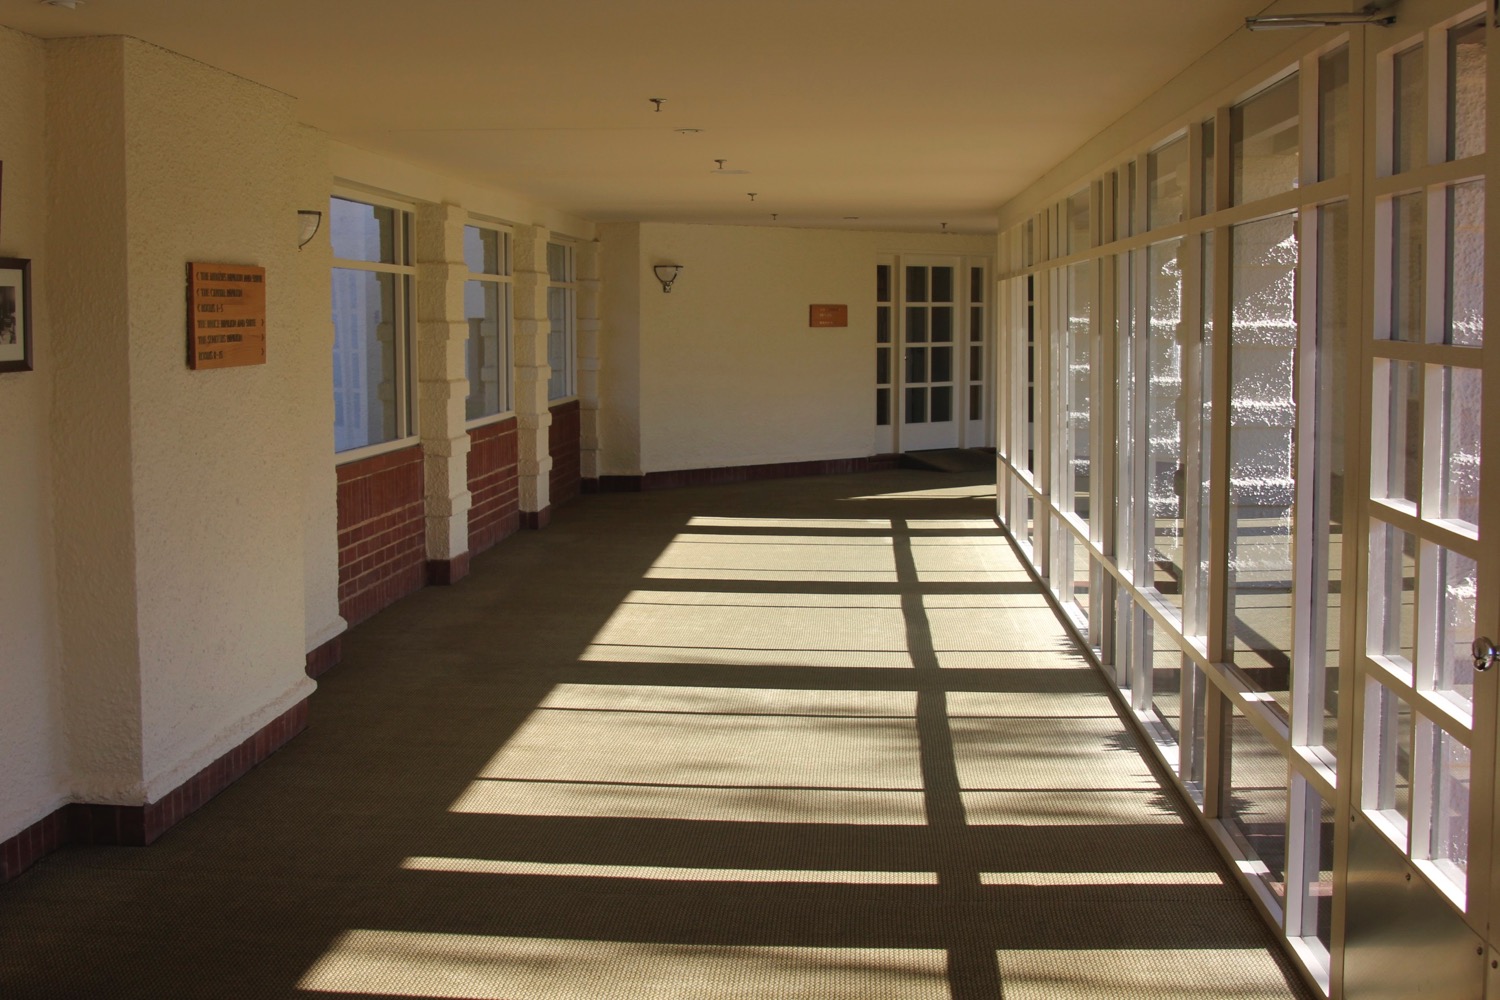 a hallway with windows and a sign